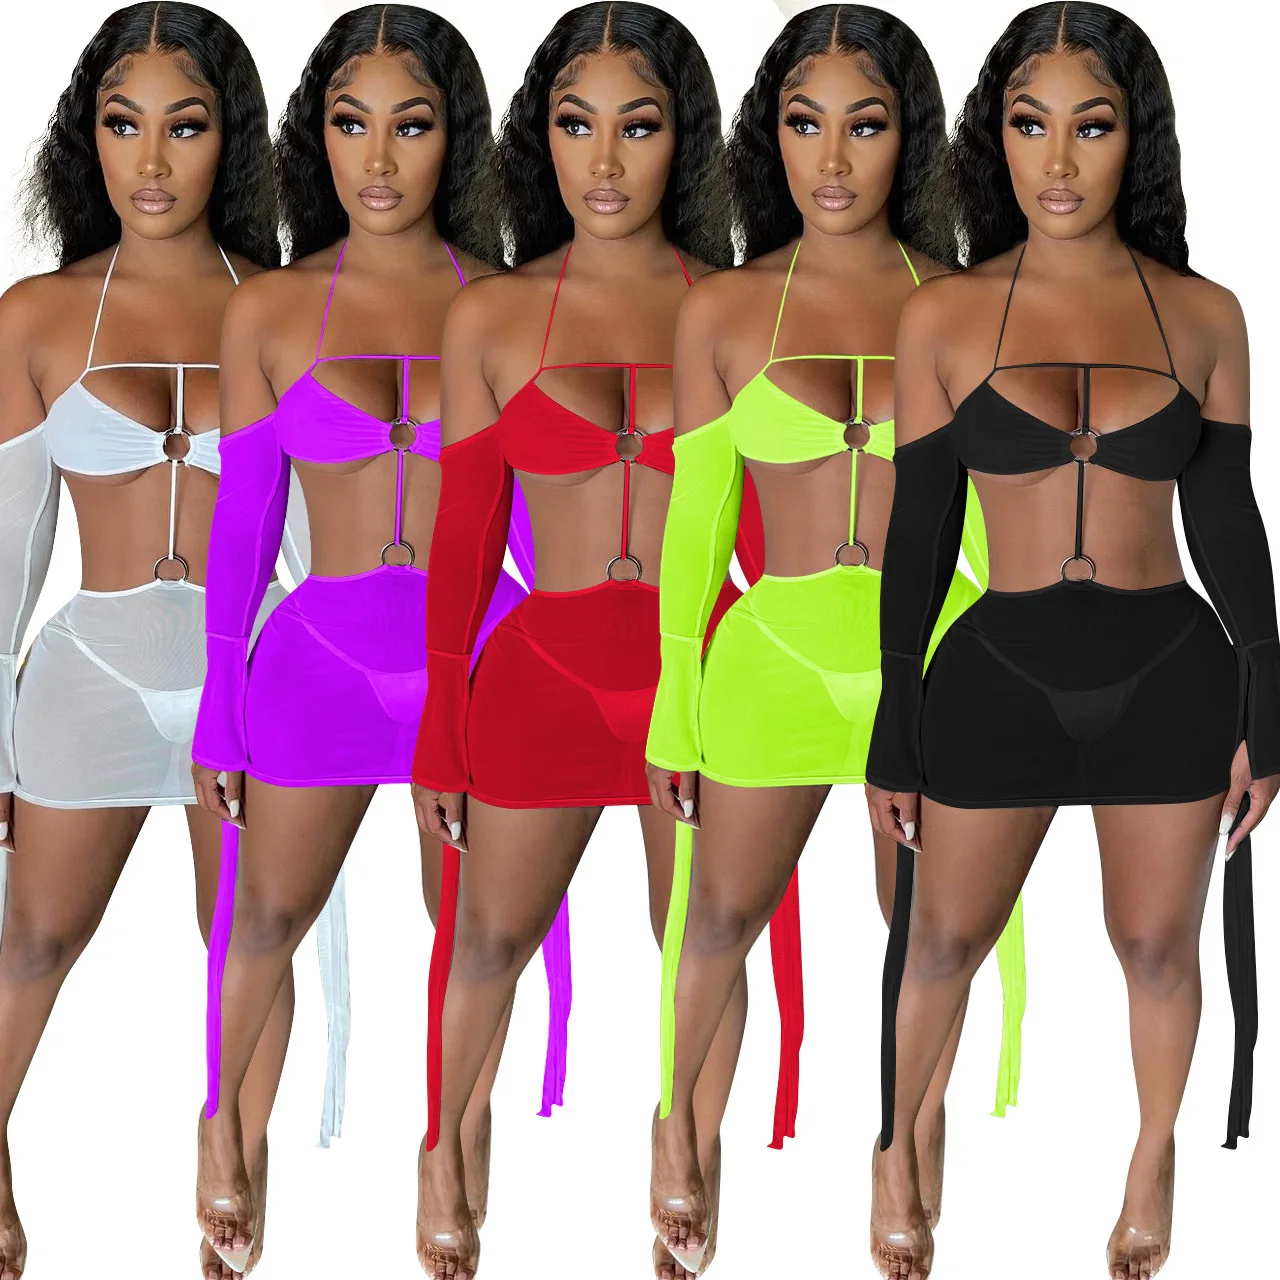 

Hot Selling 2021 Summer Club Wear Cut Out Dress Neon Color See Through Cross Front Halter Neck Dress, White, yellow, red, purple, black